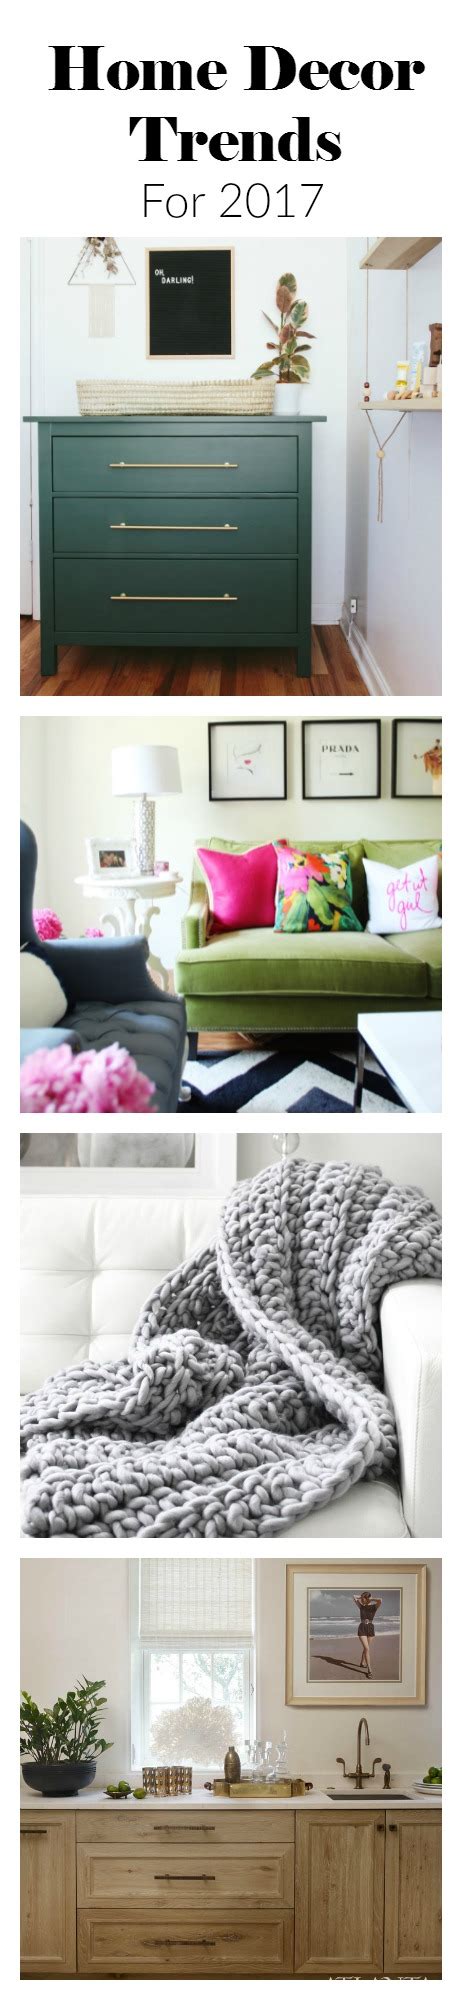 Home Decor Trends In 2017 Brooklyn Berry Designs